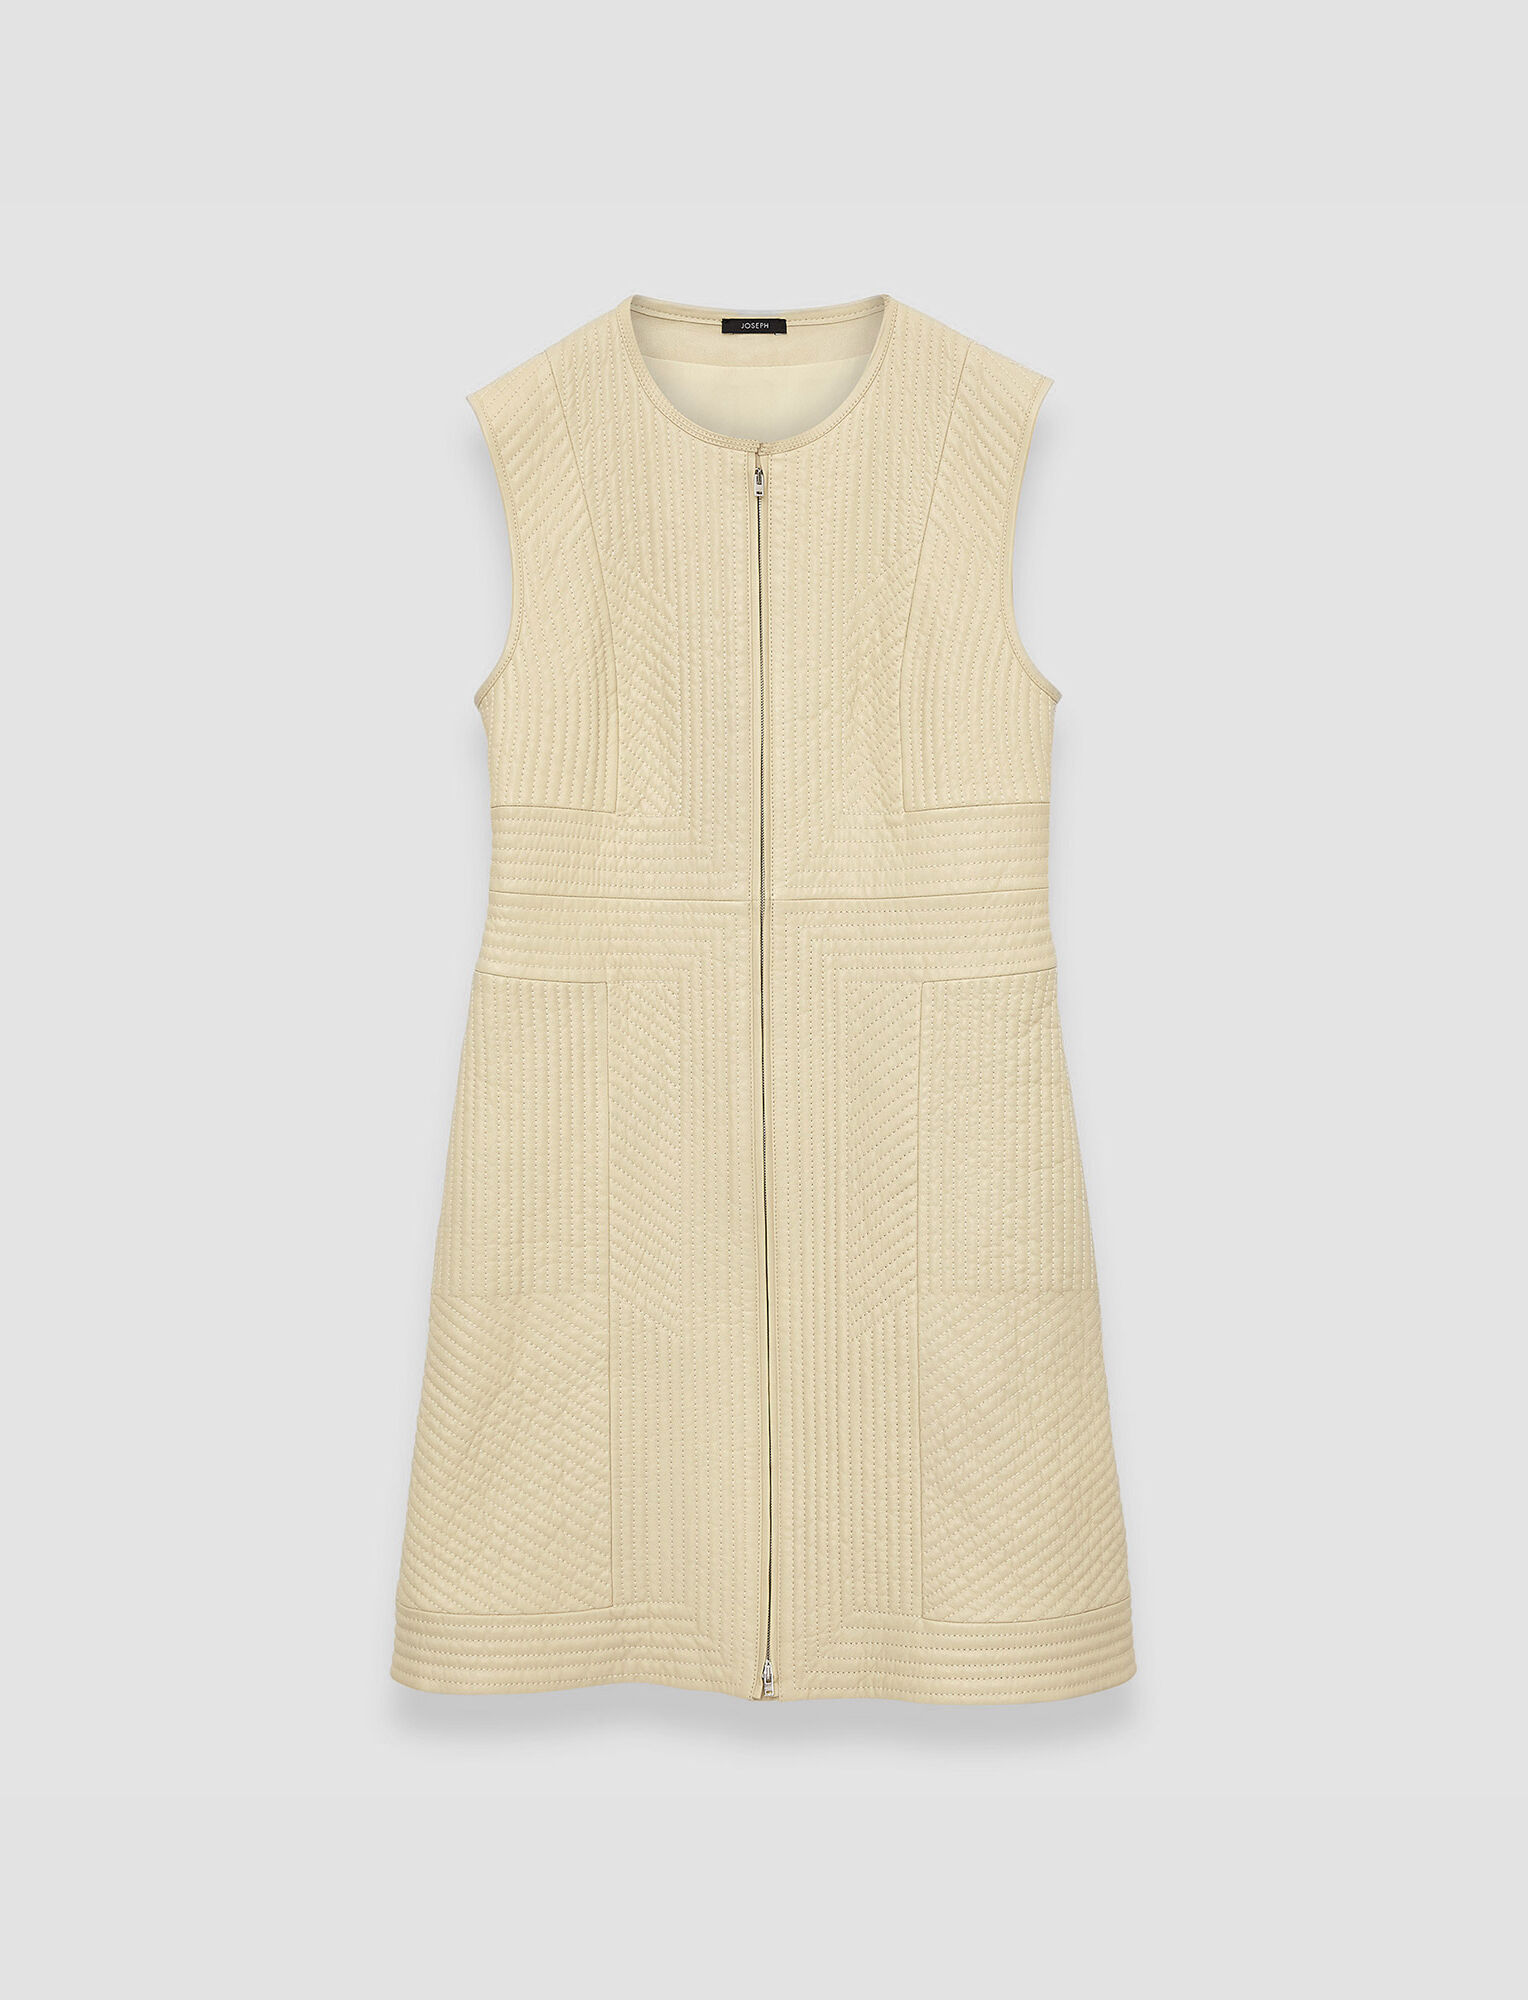 Joseph, Embellished Leather Davy Dress, in Pale Olive